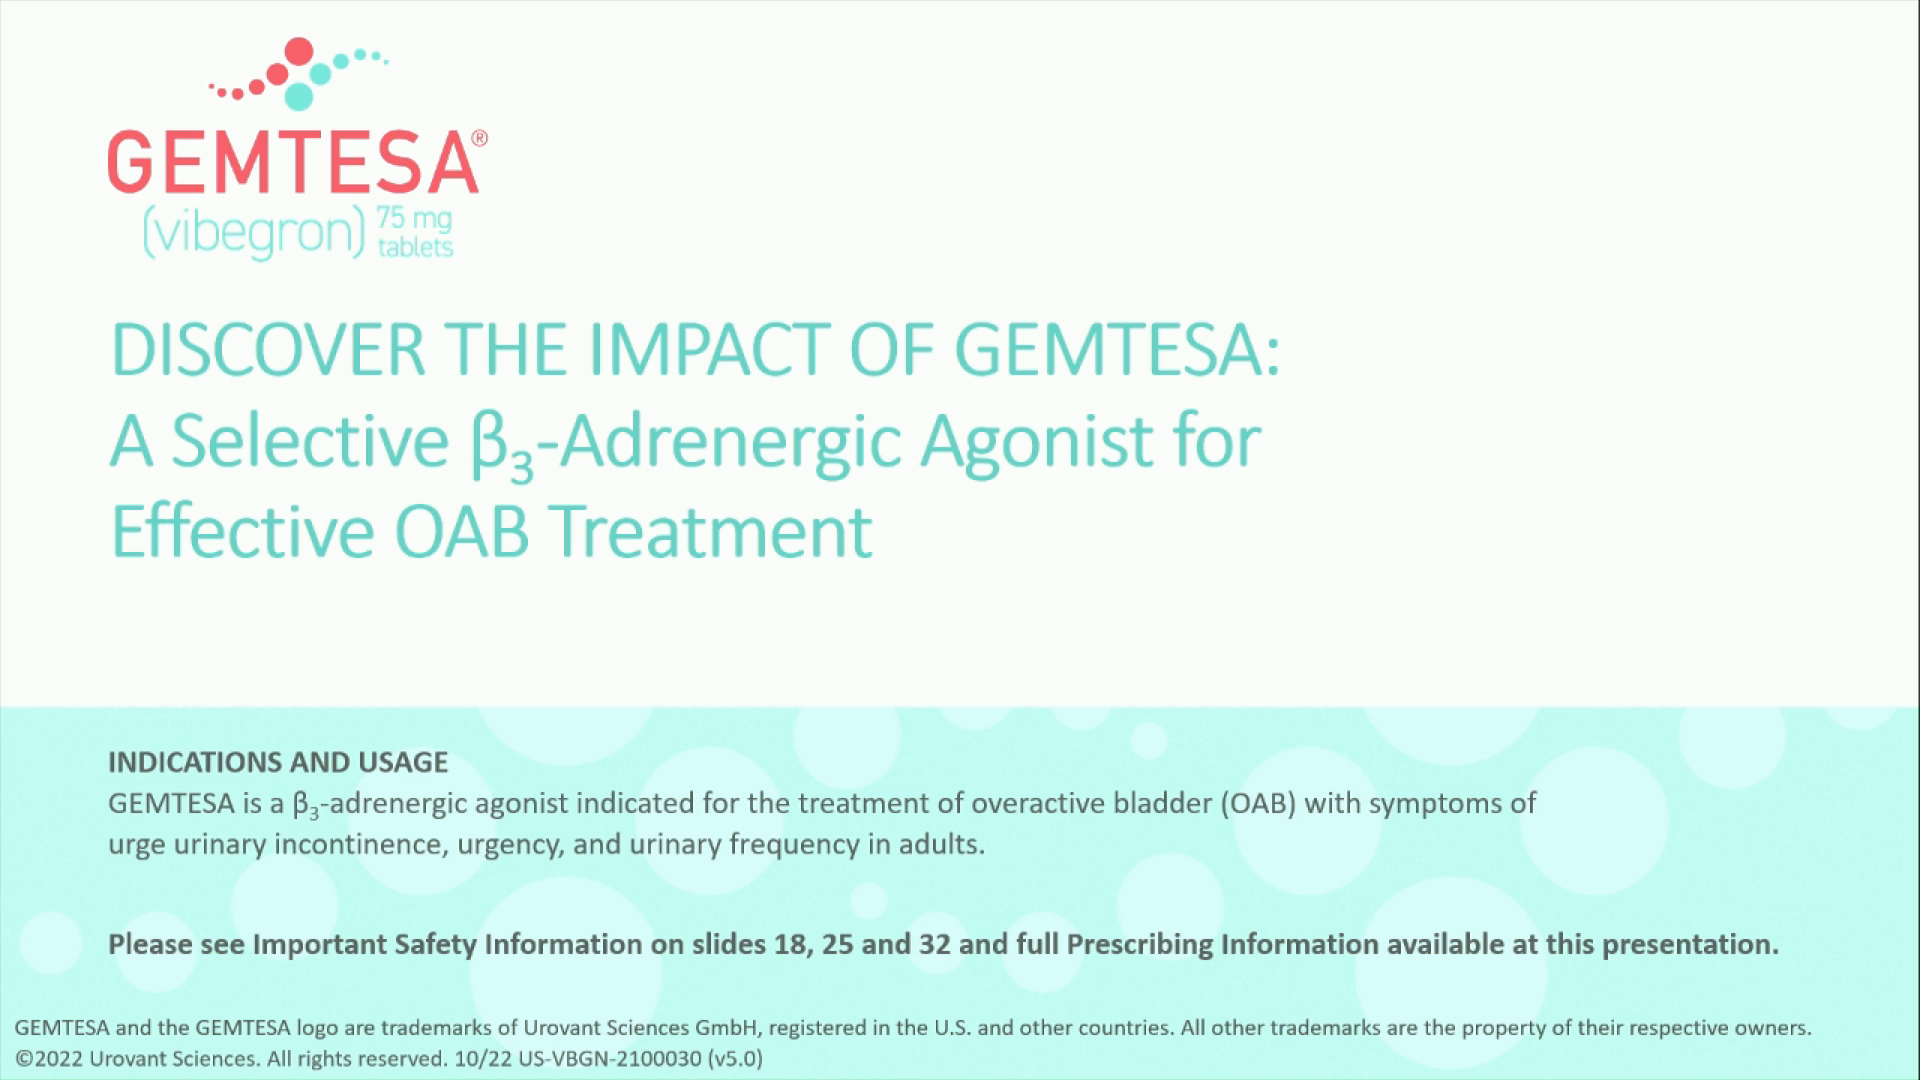 Lunch Theater: Discover the Impact of GEMTESA: A Selective β3-Adrenergic Agonist for Effective OAB Treatment